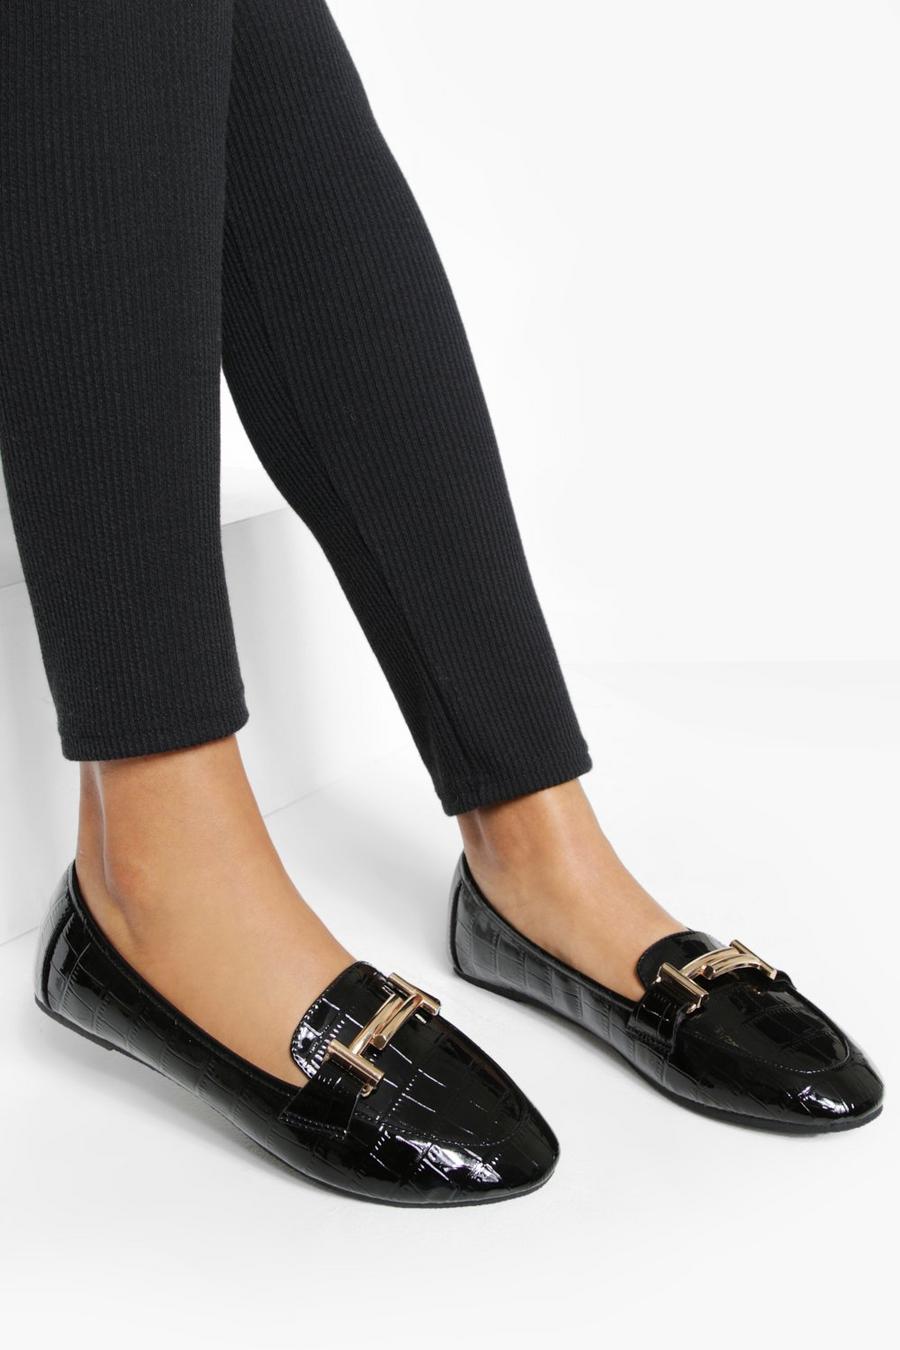 Black Wide Width Patent Croc Double Bar Loafers image number 1